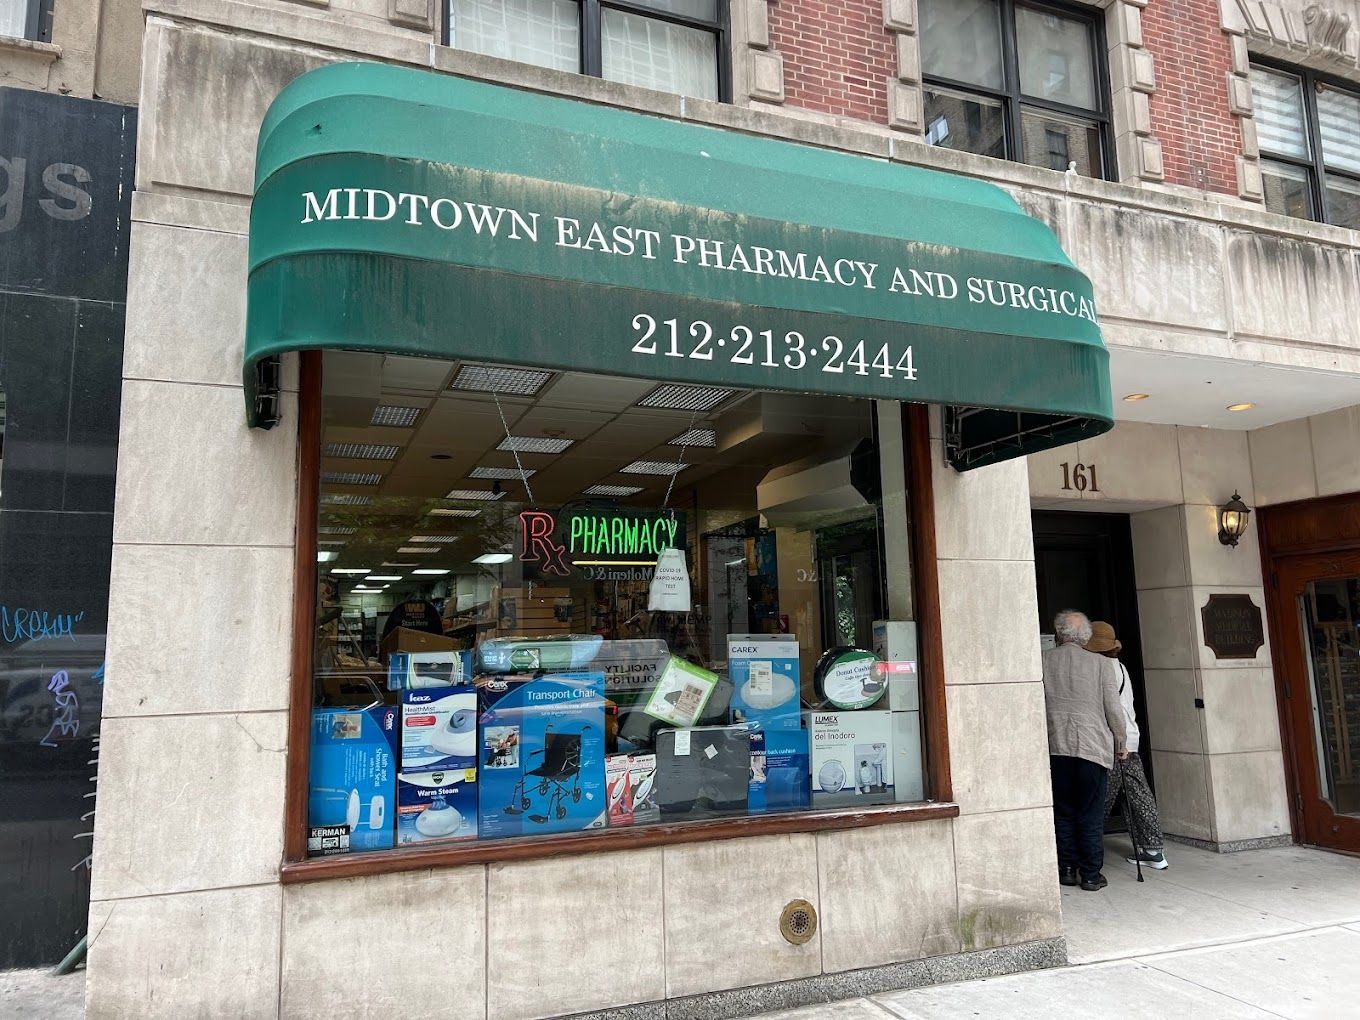 Midtown East Pharmacy & Surgical